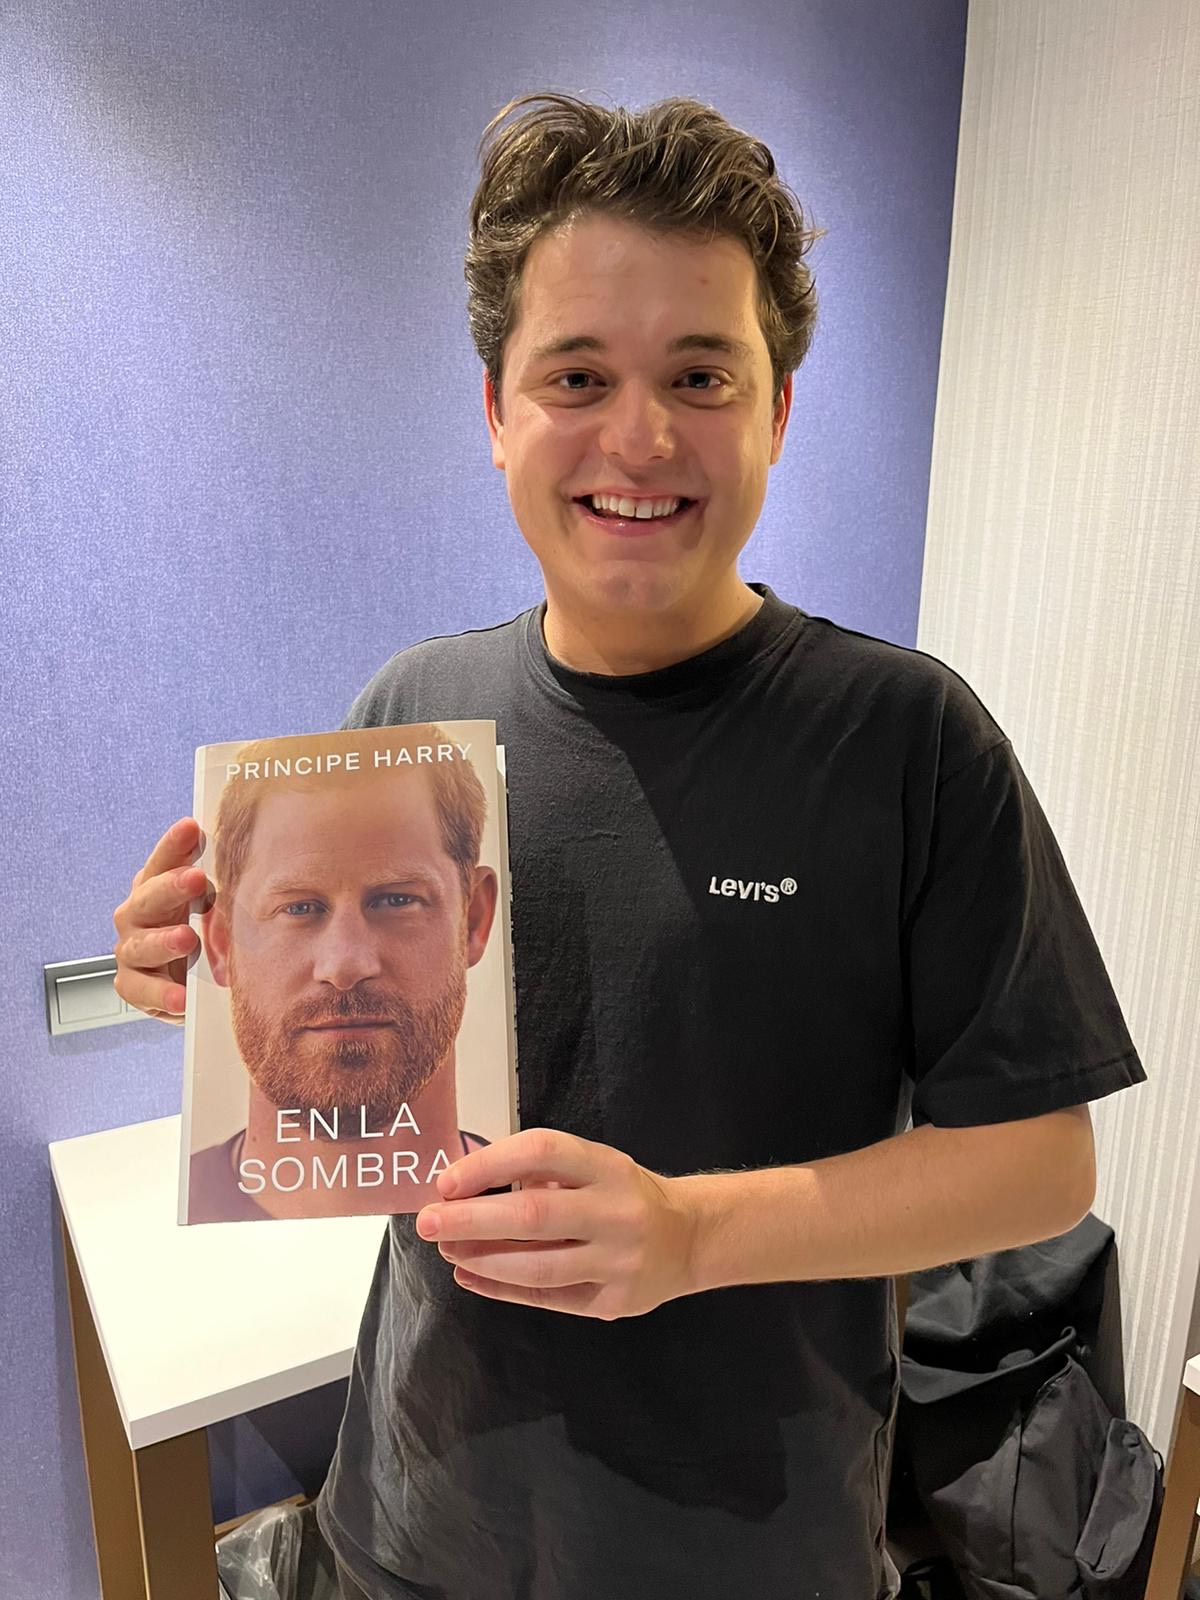 Prince Harry’s bombshell book accidentally goes on sale early in Spain – and we got our hands on one of the first copies